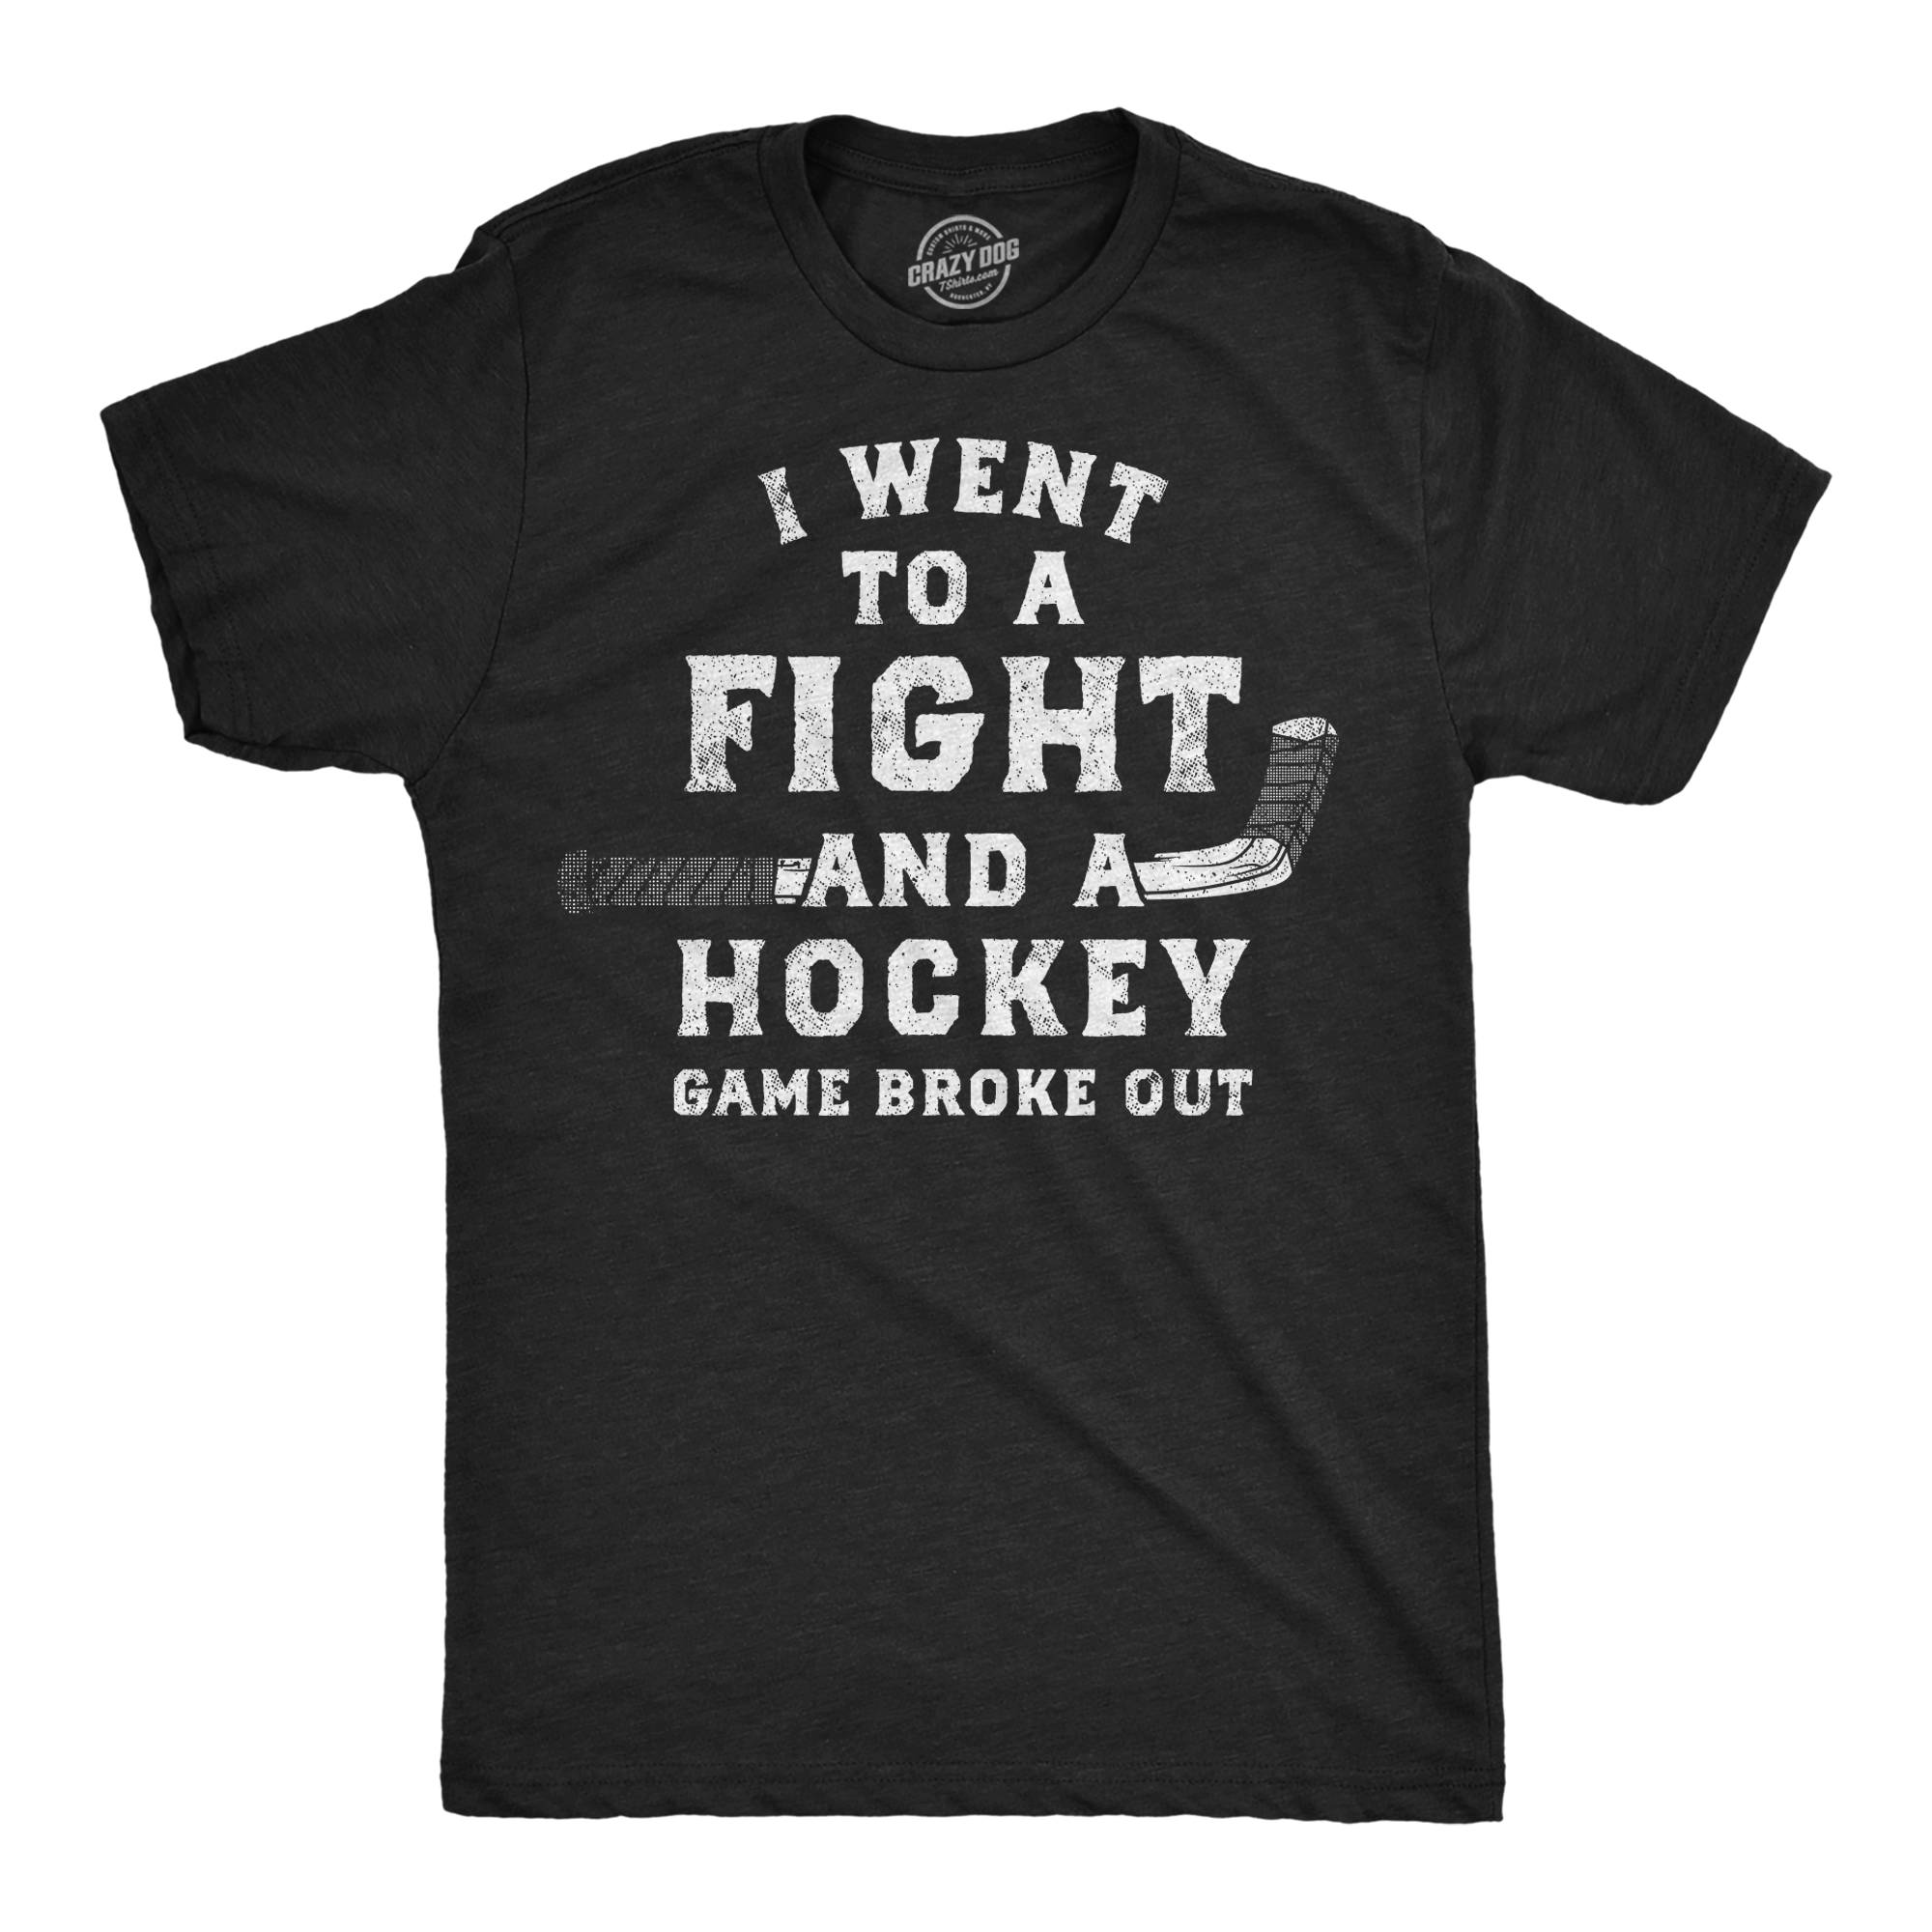 Funny Heather Black - Fight Hockey I Went To A Fight And A Hockey Game Broke Out Mens T Shirt Nerdy Hockey sarcastic Tee